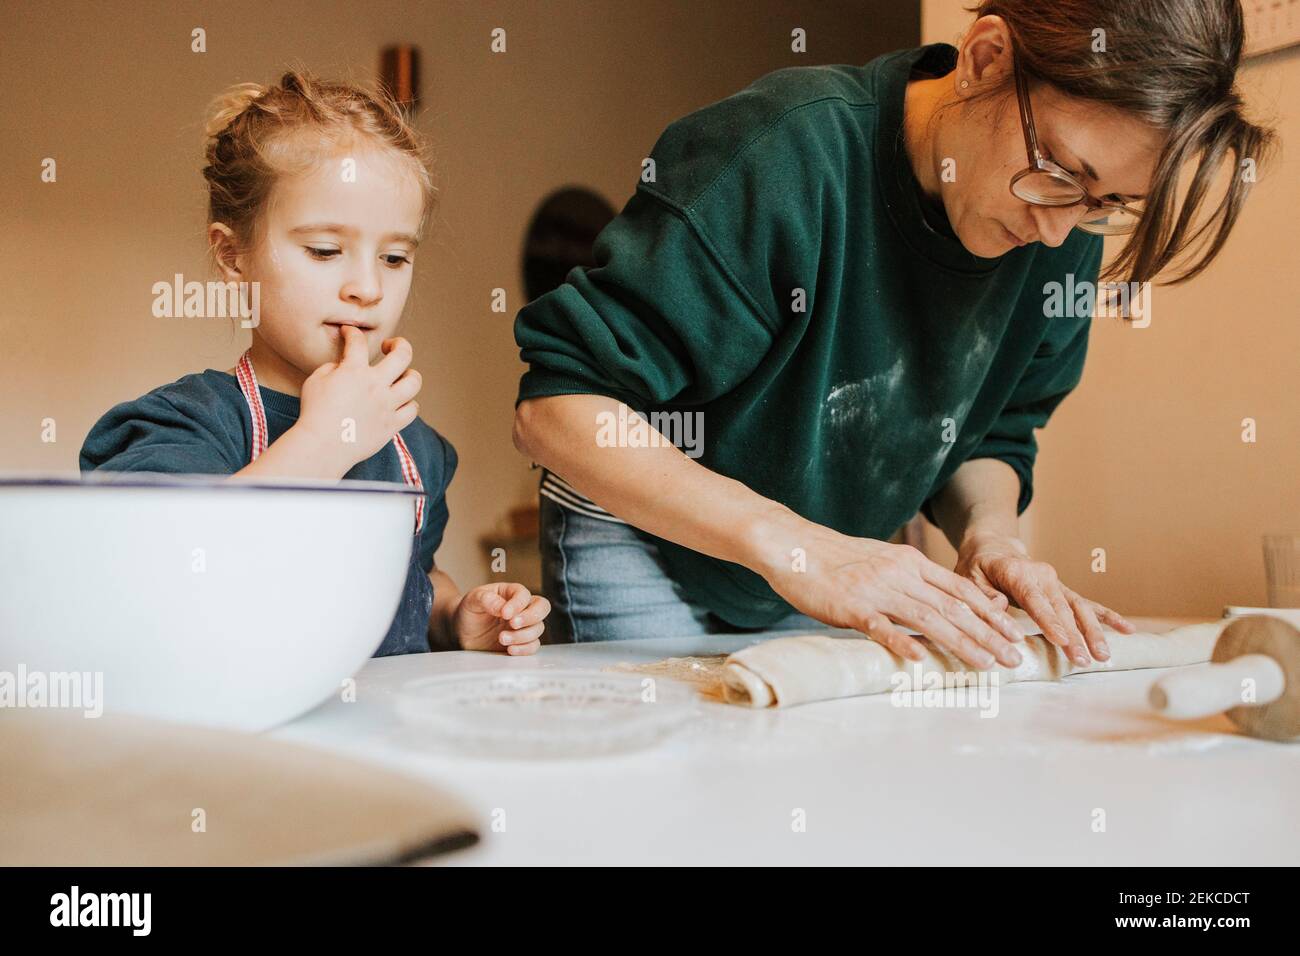 Mother rolling cinnamon roll dough with daughter at home Stock Photo